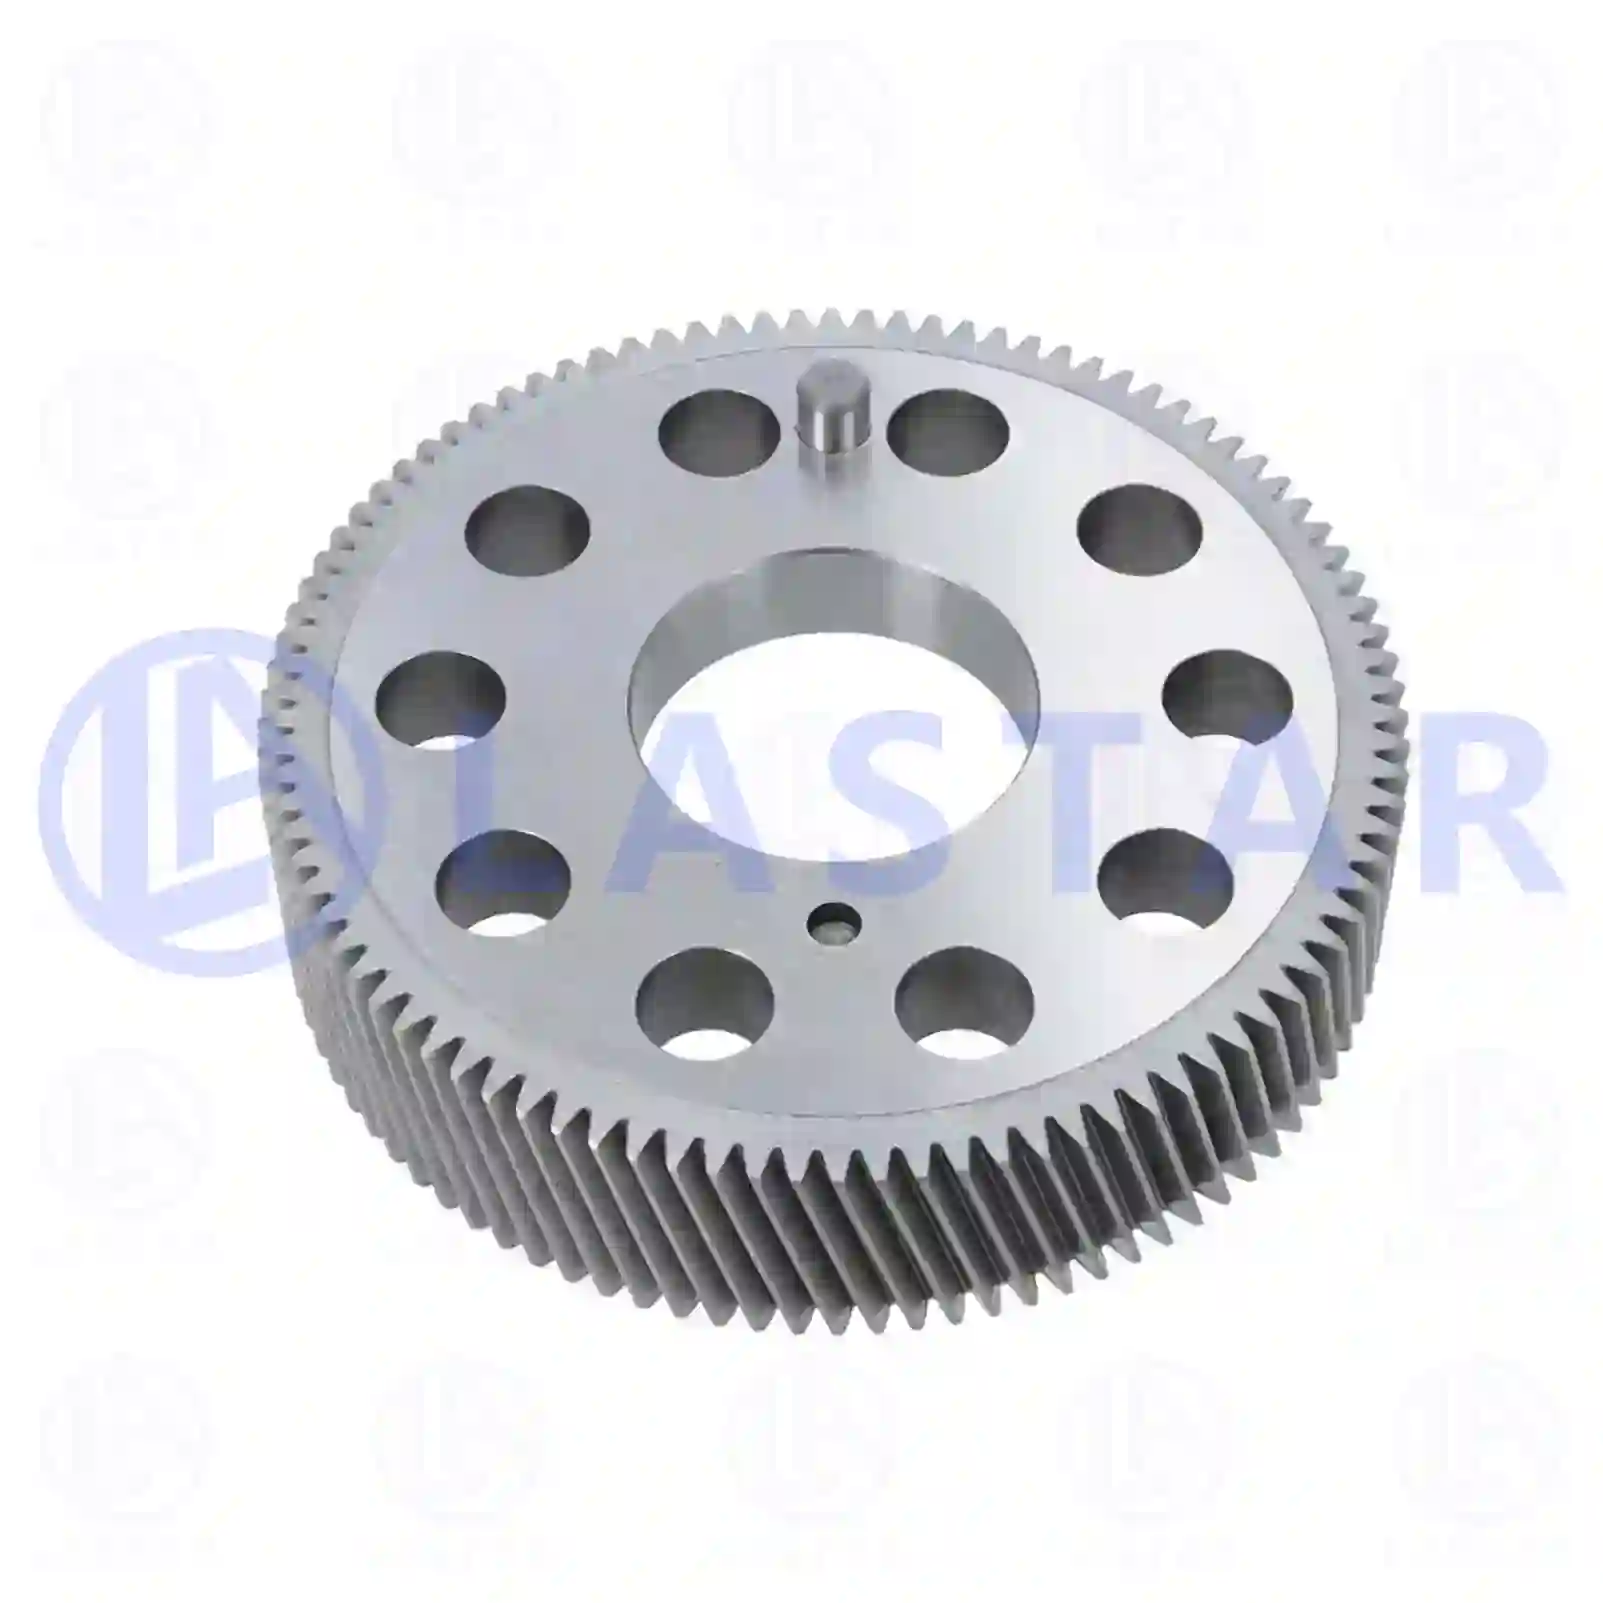 Gear, 77704839, 1784534, 2085813 ||  77704839 Lastar Spare Part | Truck Spare Parts, Auotomotive Spare Parts Gear, 77704839, 1784534, 2085813 ||  77704839 Lastar Spare Part | Truck Spare Parts, Auotomotive Spare Parts